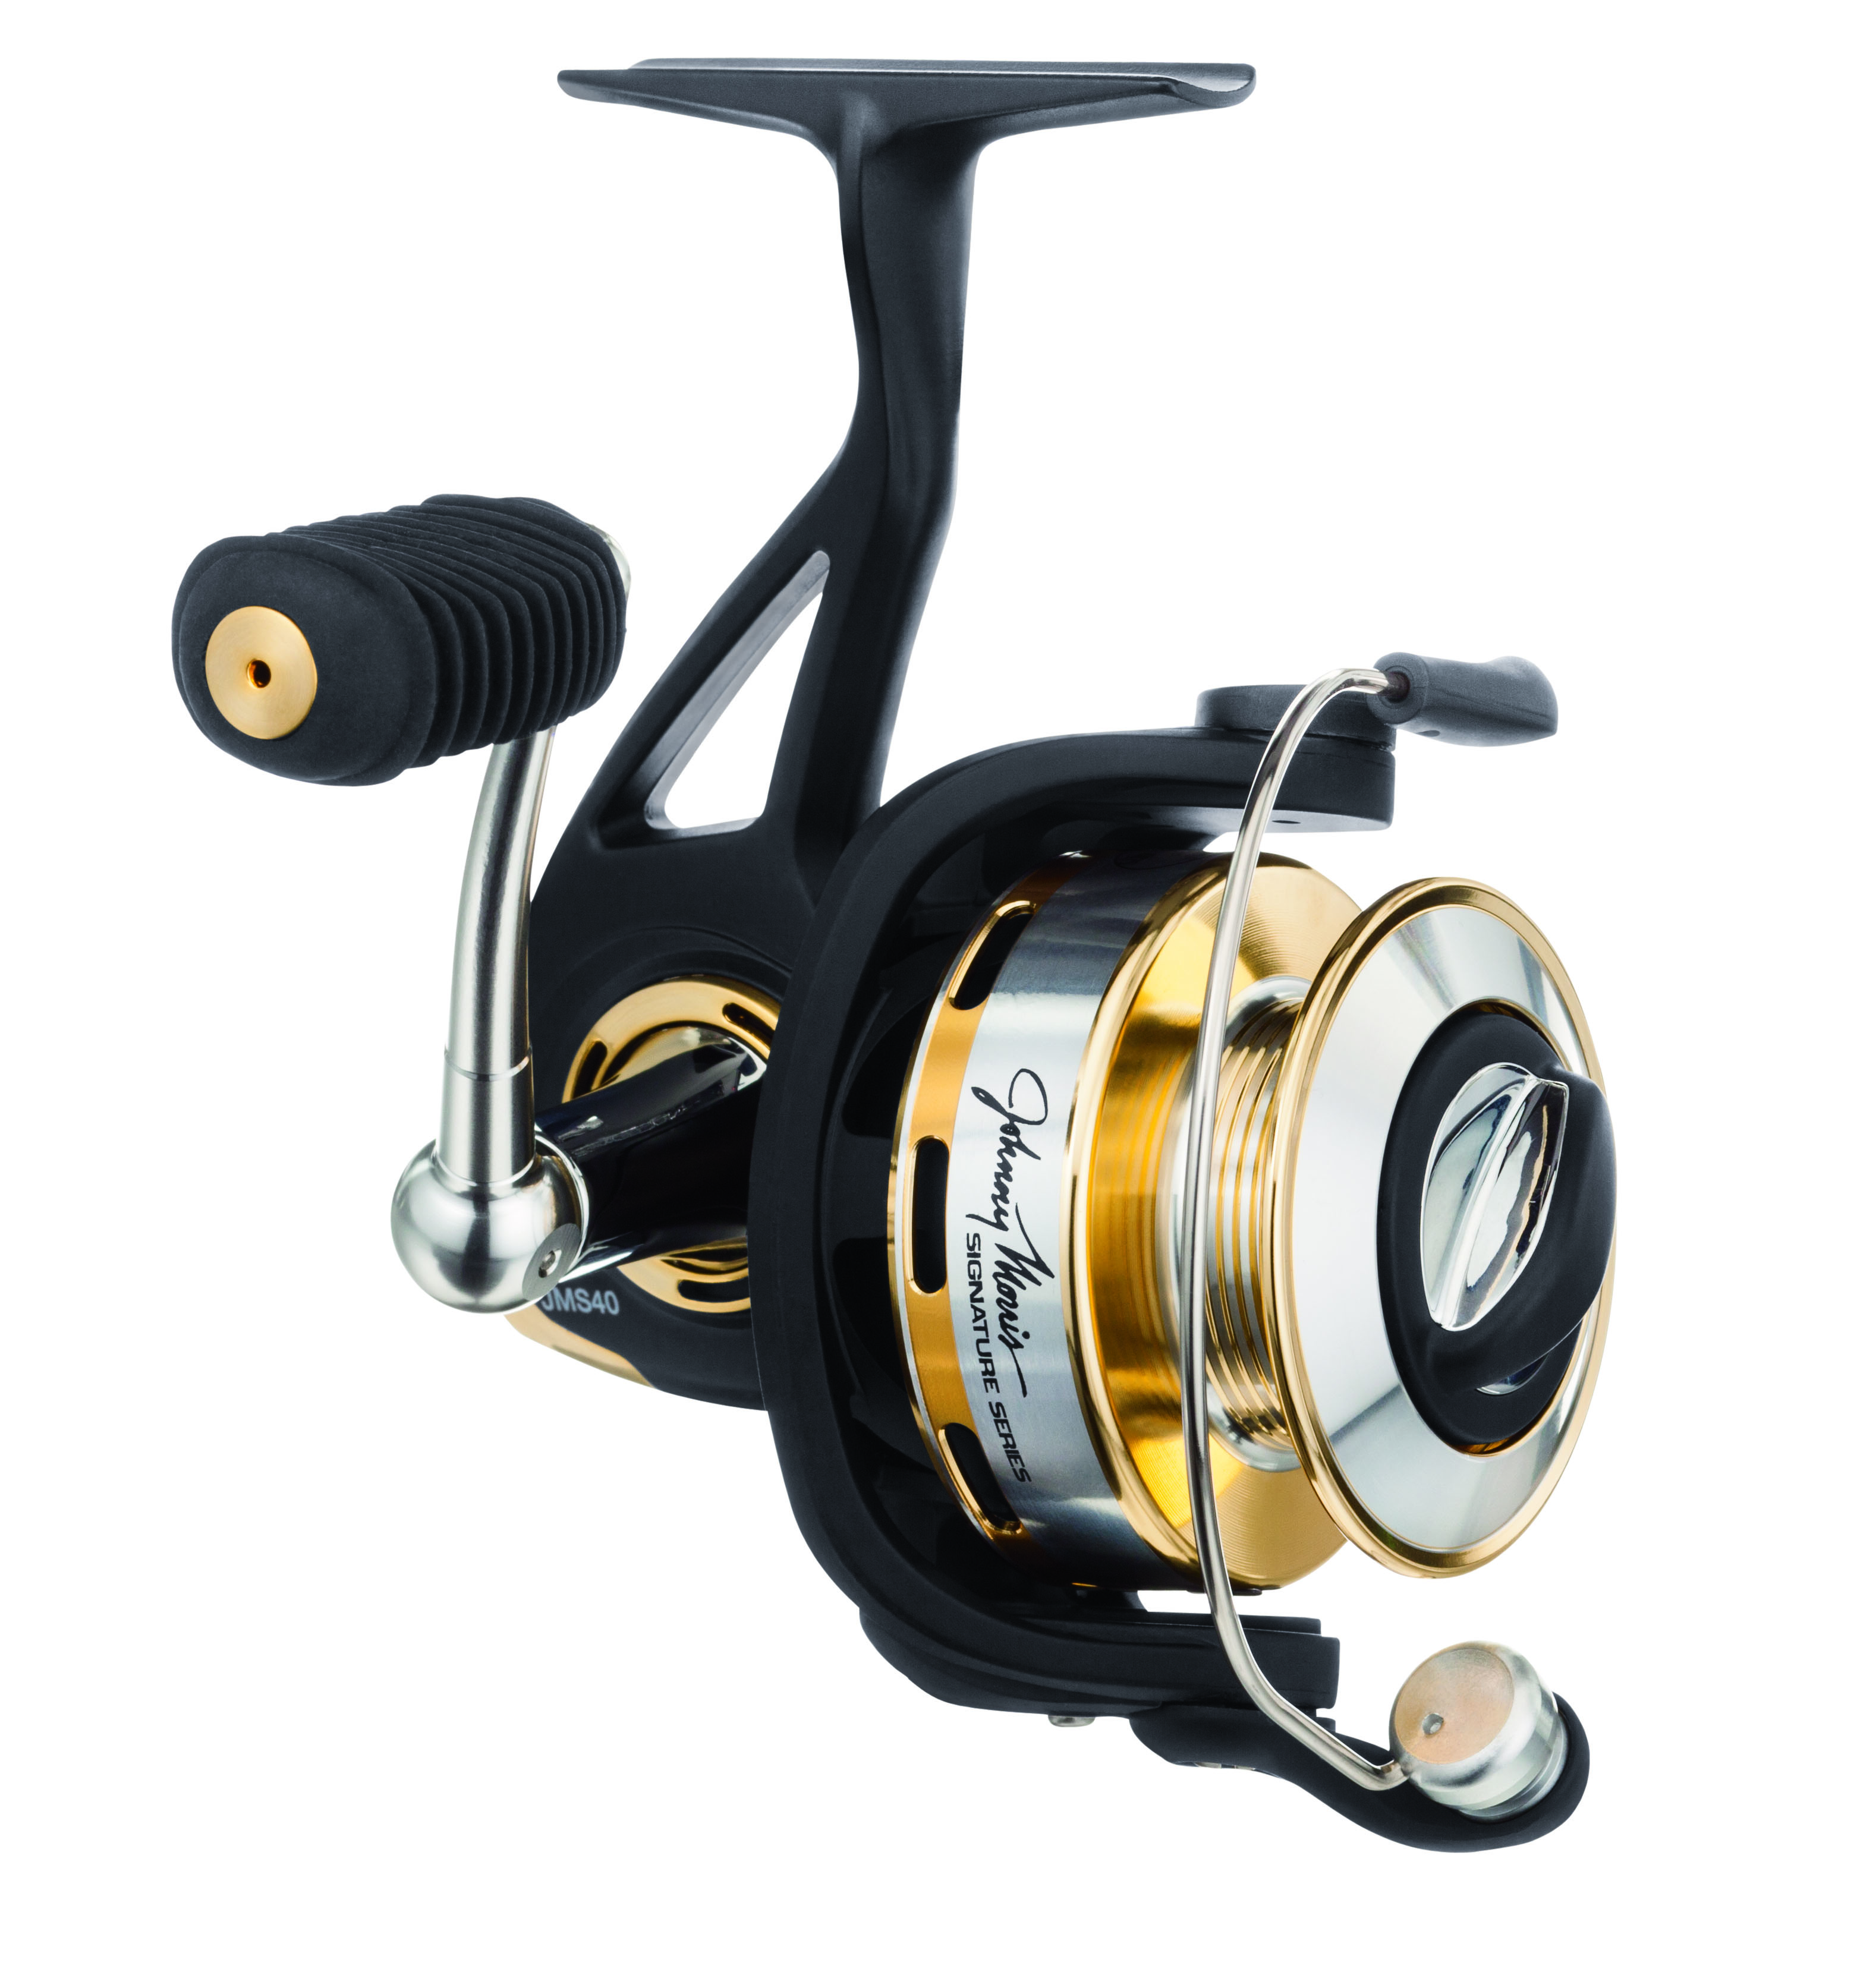 Bass Pro Shops® Johnny Morris Signature Series Spinning Reel